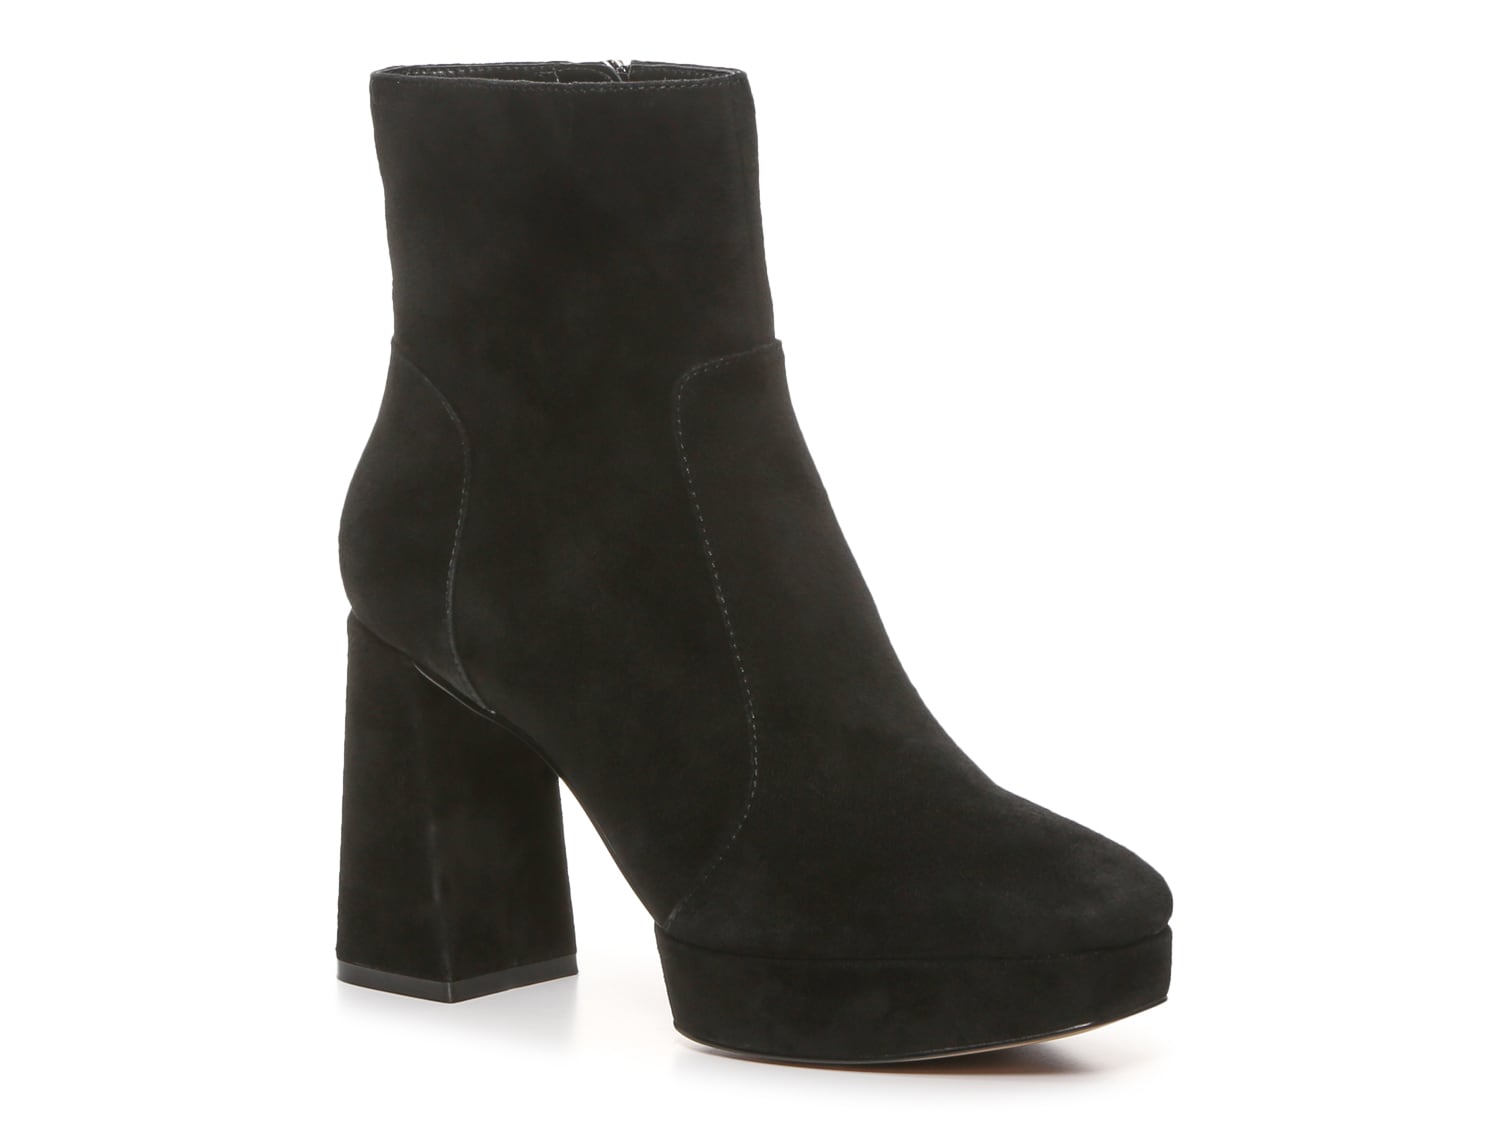 Vince Camuto Penella Platform Bootie - Free Shipping | DSW